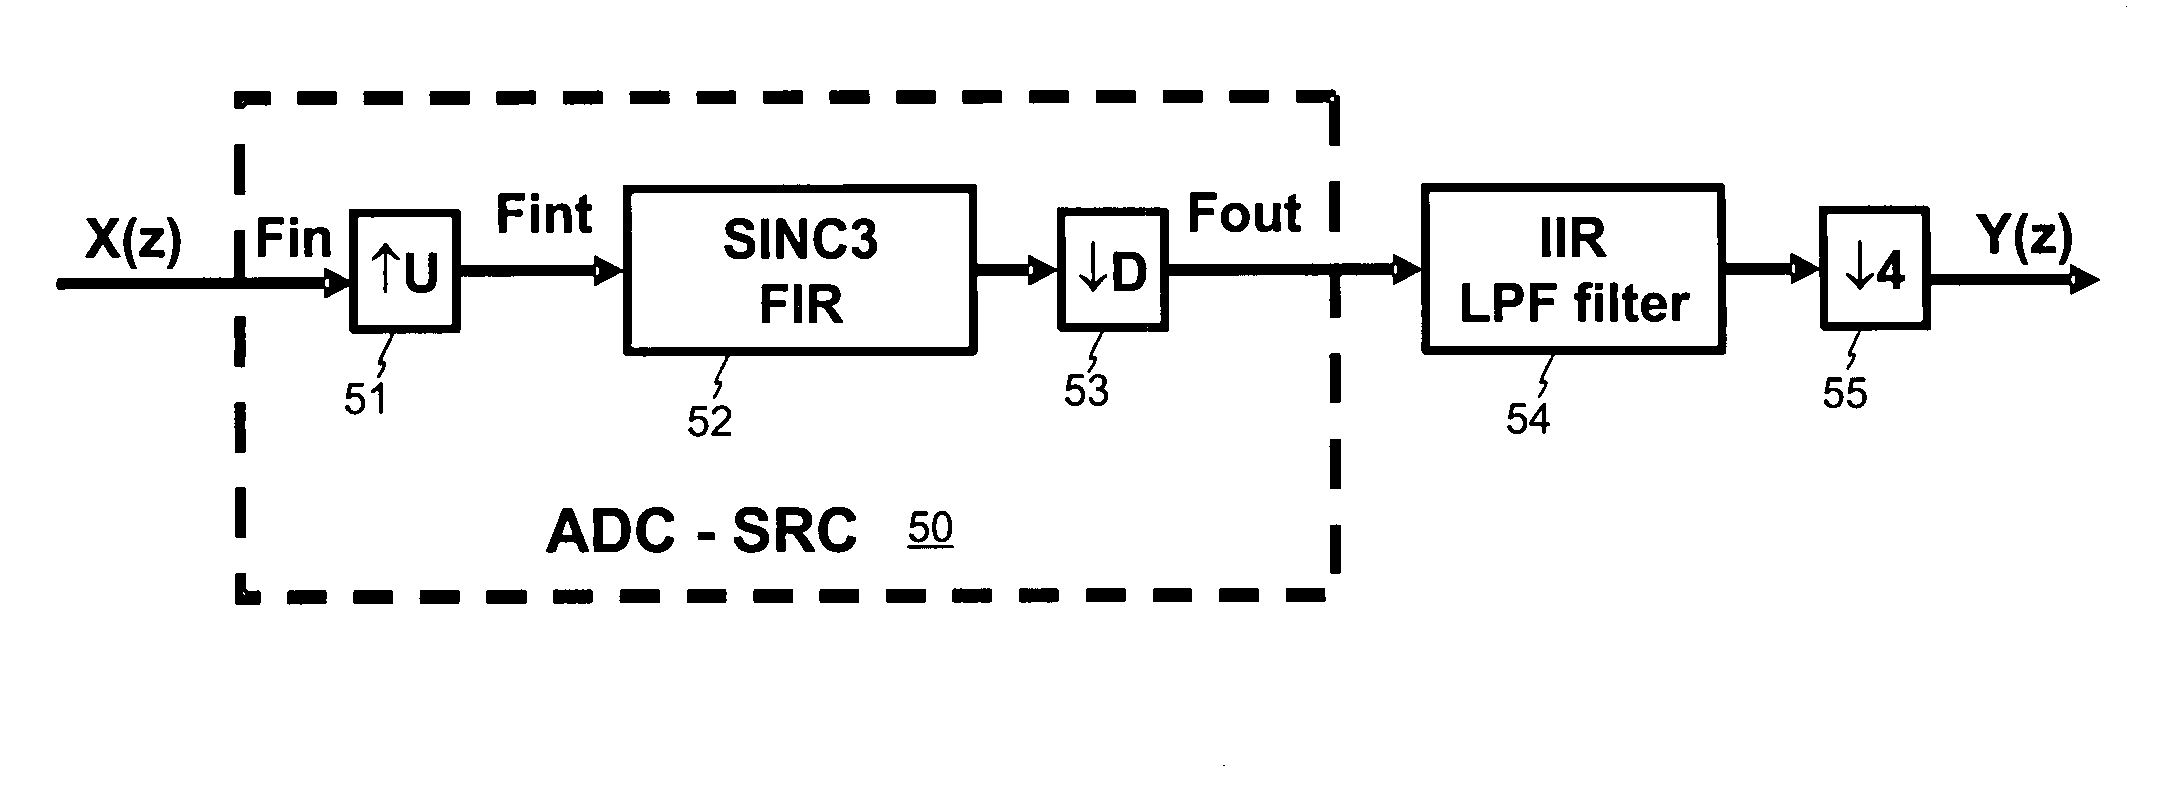 Sample rate converter for reducing the sampling frequency of a signal by a fractional number